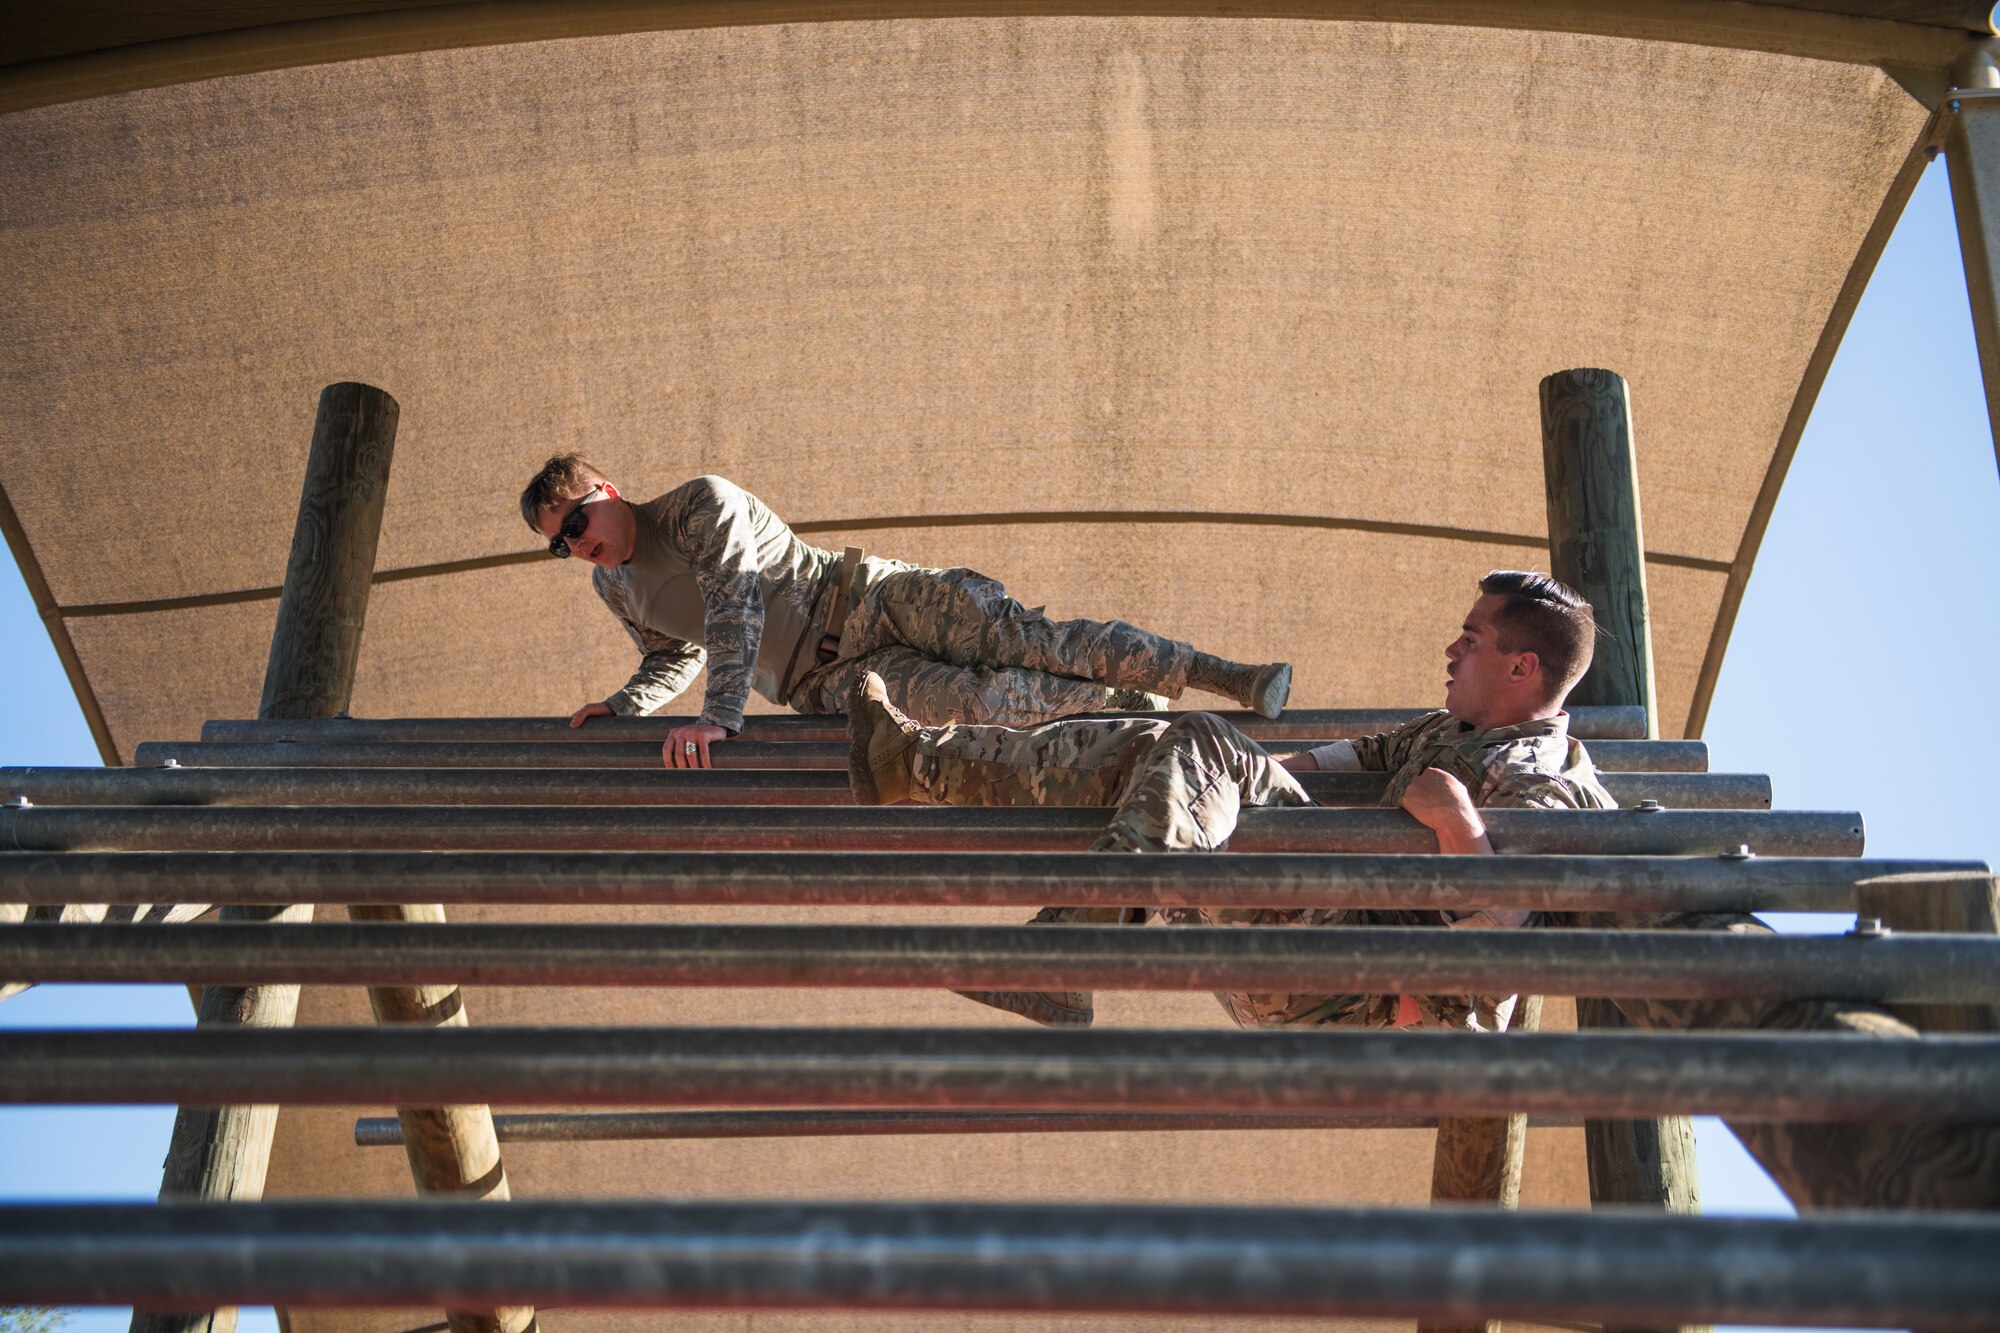 U.S. Air Force Senior Airman Paul Cupp (left), 42nd Security Forces Squadron, Maxwell-Gunter Air Force Base, Ala., and Senior Airman Andrew Vance, 902nd Security Forces Squadron military working dog handler, Joint Base San Antonio-Randolph, take part in the obstacle course portion of the Air Education and Training Command Defender Challenge team tryout at Joint Base San Antonio-Medina Annex, Texas, Jan. 29, 2020. The five-day selection camp includes a physical fitness test, M-9 and M-4 weapons firing, the alpha warrior obstacle course, a ruck march and also includes a military working dog tryout as well. A total of 27 Airmen, including five MWD handlers and their canine partners, were invited to tryout for the team. The seven selectees to the AETC team will represent the First Command at the career field’s world-wide competition that will be held at JBSA-Camp Bullis in May 2020. (U.S. Air Force photo by Sarayuth Pinthong)